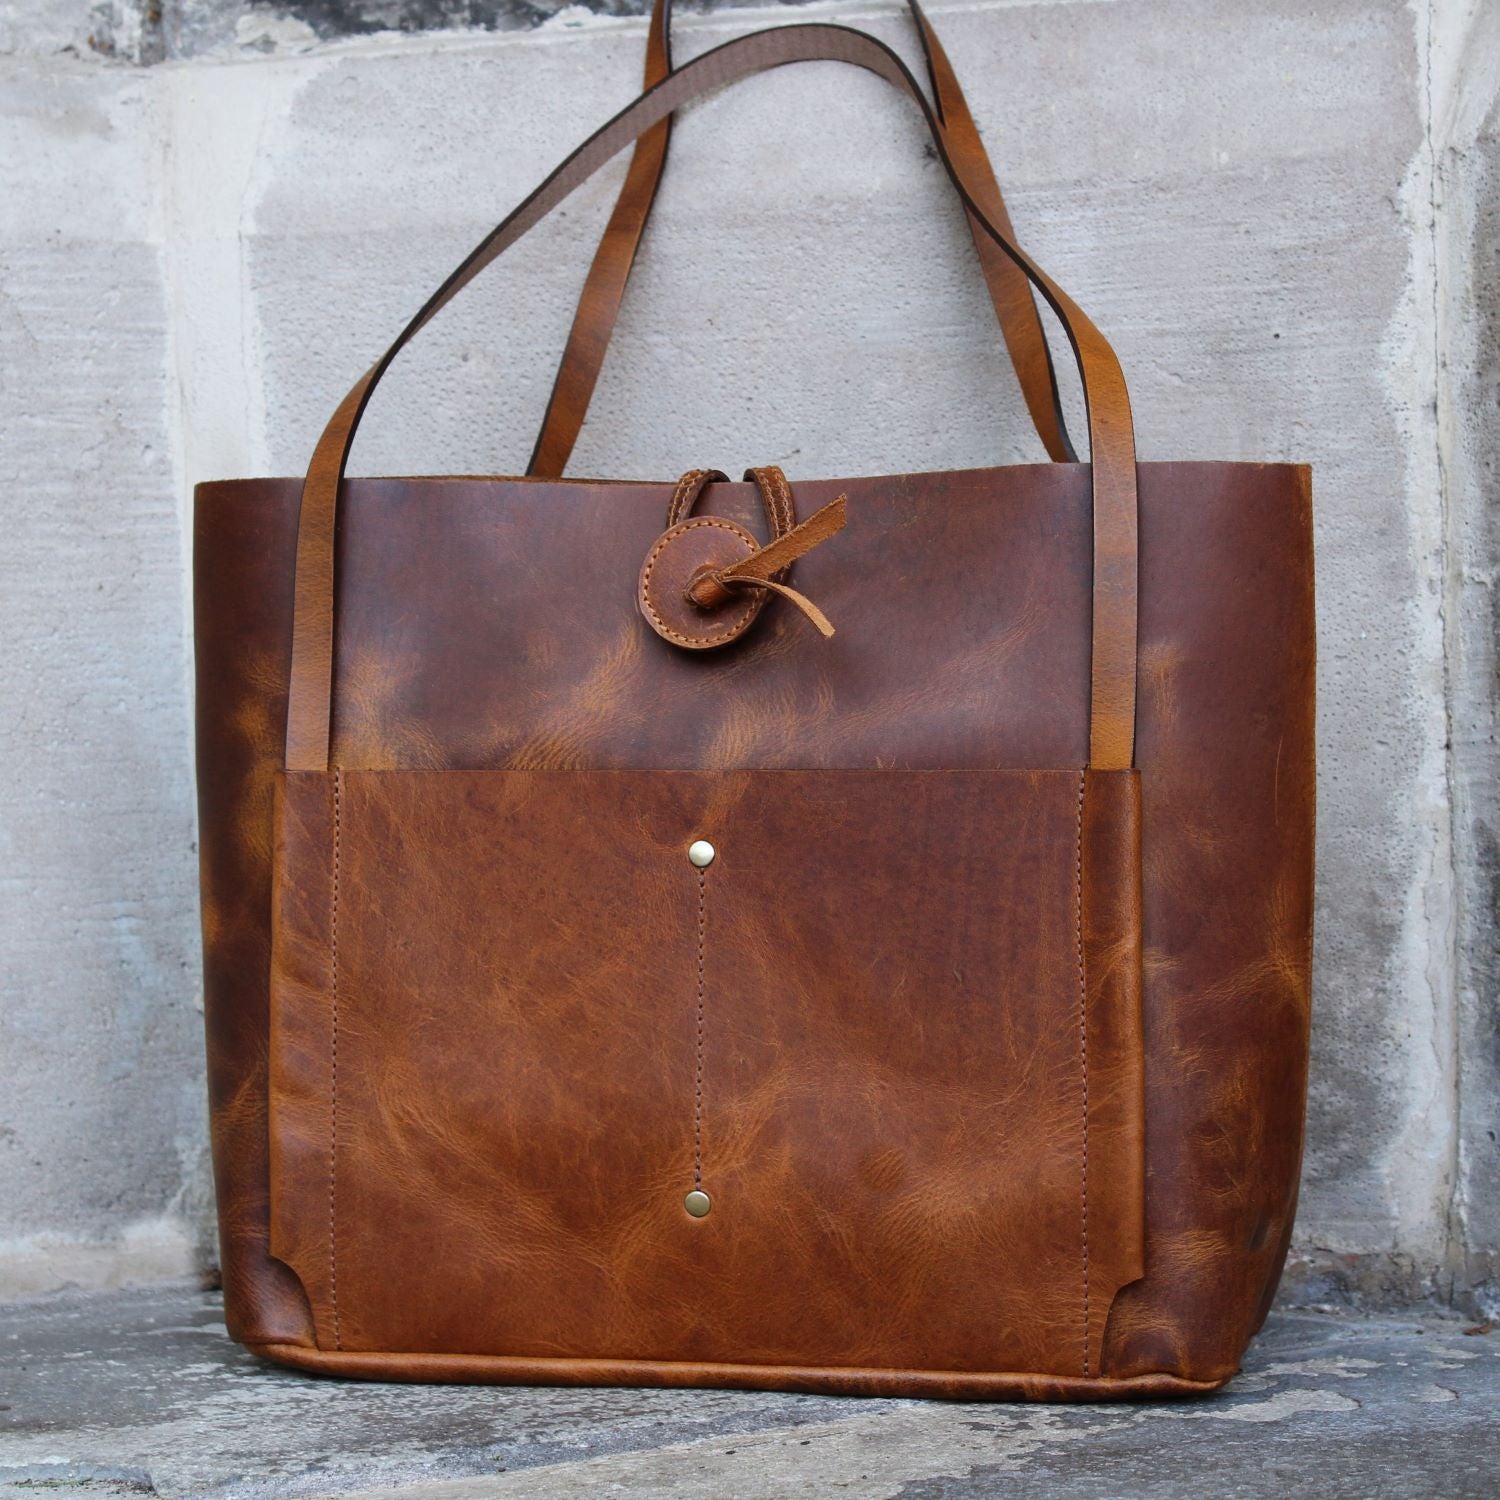 Introducing the Billy-Brown Leather Handbag, a sophisticated and exclusive tote bag crafted from luxurious buffalo leather in a unique distressed finish. With a quick access front and back sleeve, one main compartment, and an organizer panel for cards and phone, this unlined bag flawlessly blends style and functionality. Elevate your wardrobe with this elegant and tasteful bag.